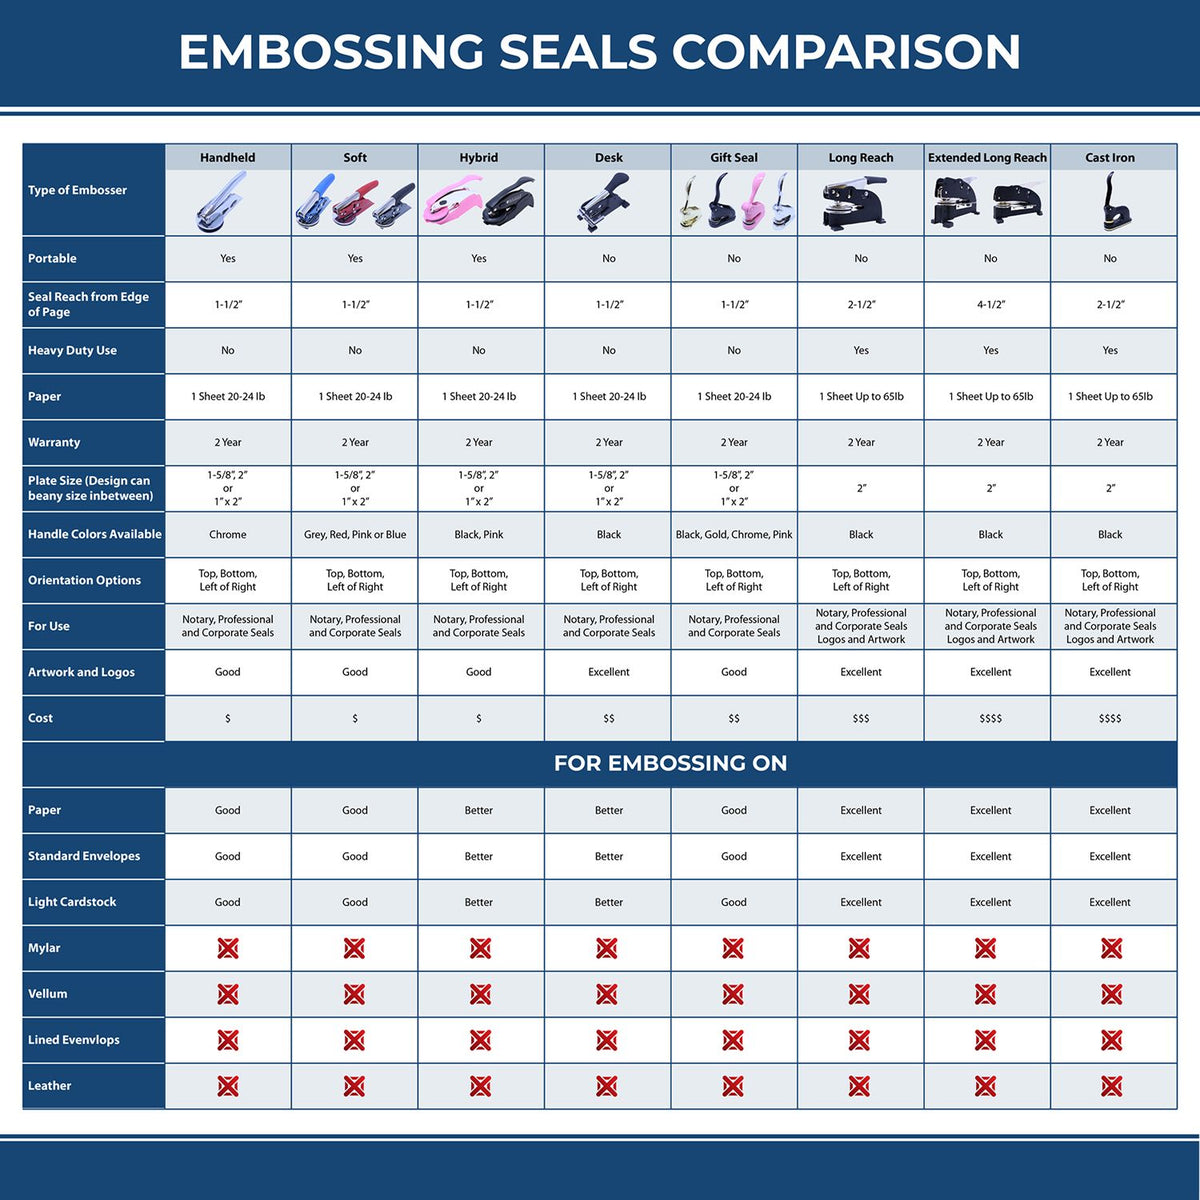 A comparison chart for the different types of mount models available for the Hybrid Vermont Geologist Seal